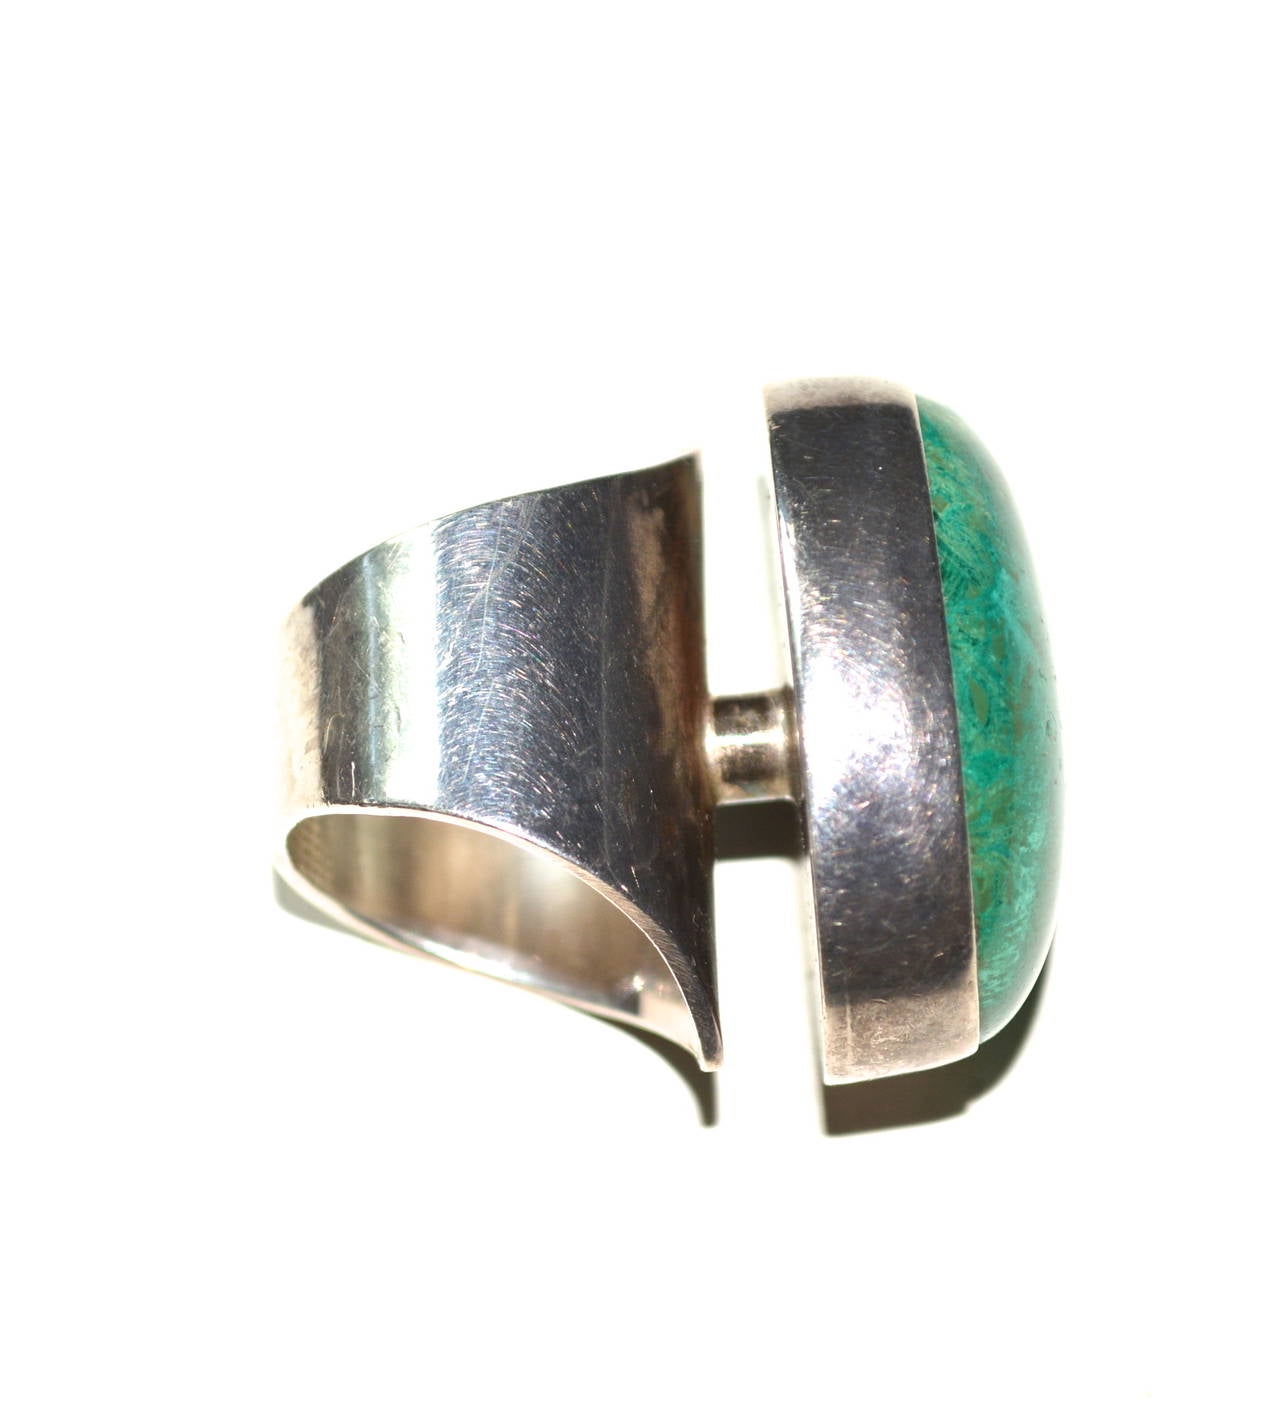 Mod Sterling Ring In Excellent Condition For Sale In Litchfield County, CT